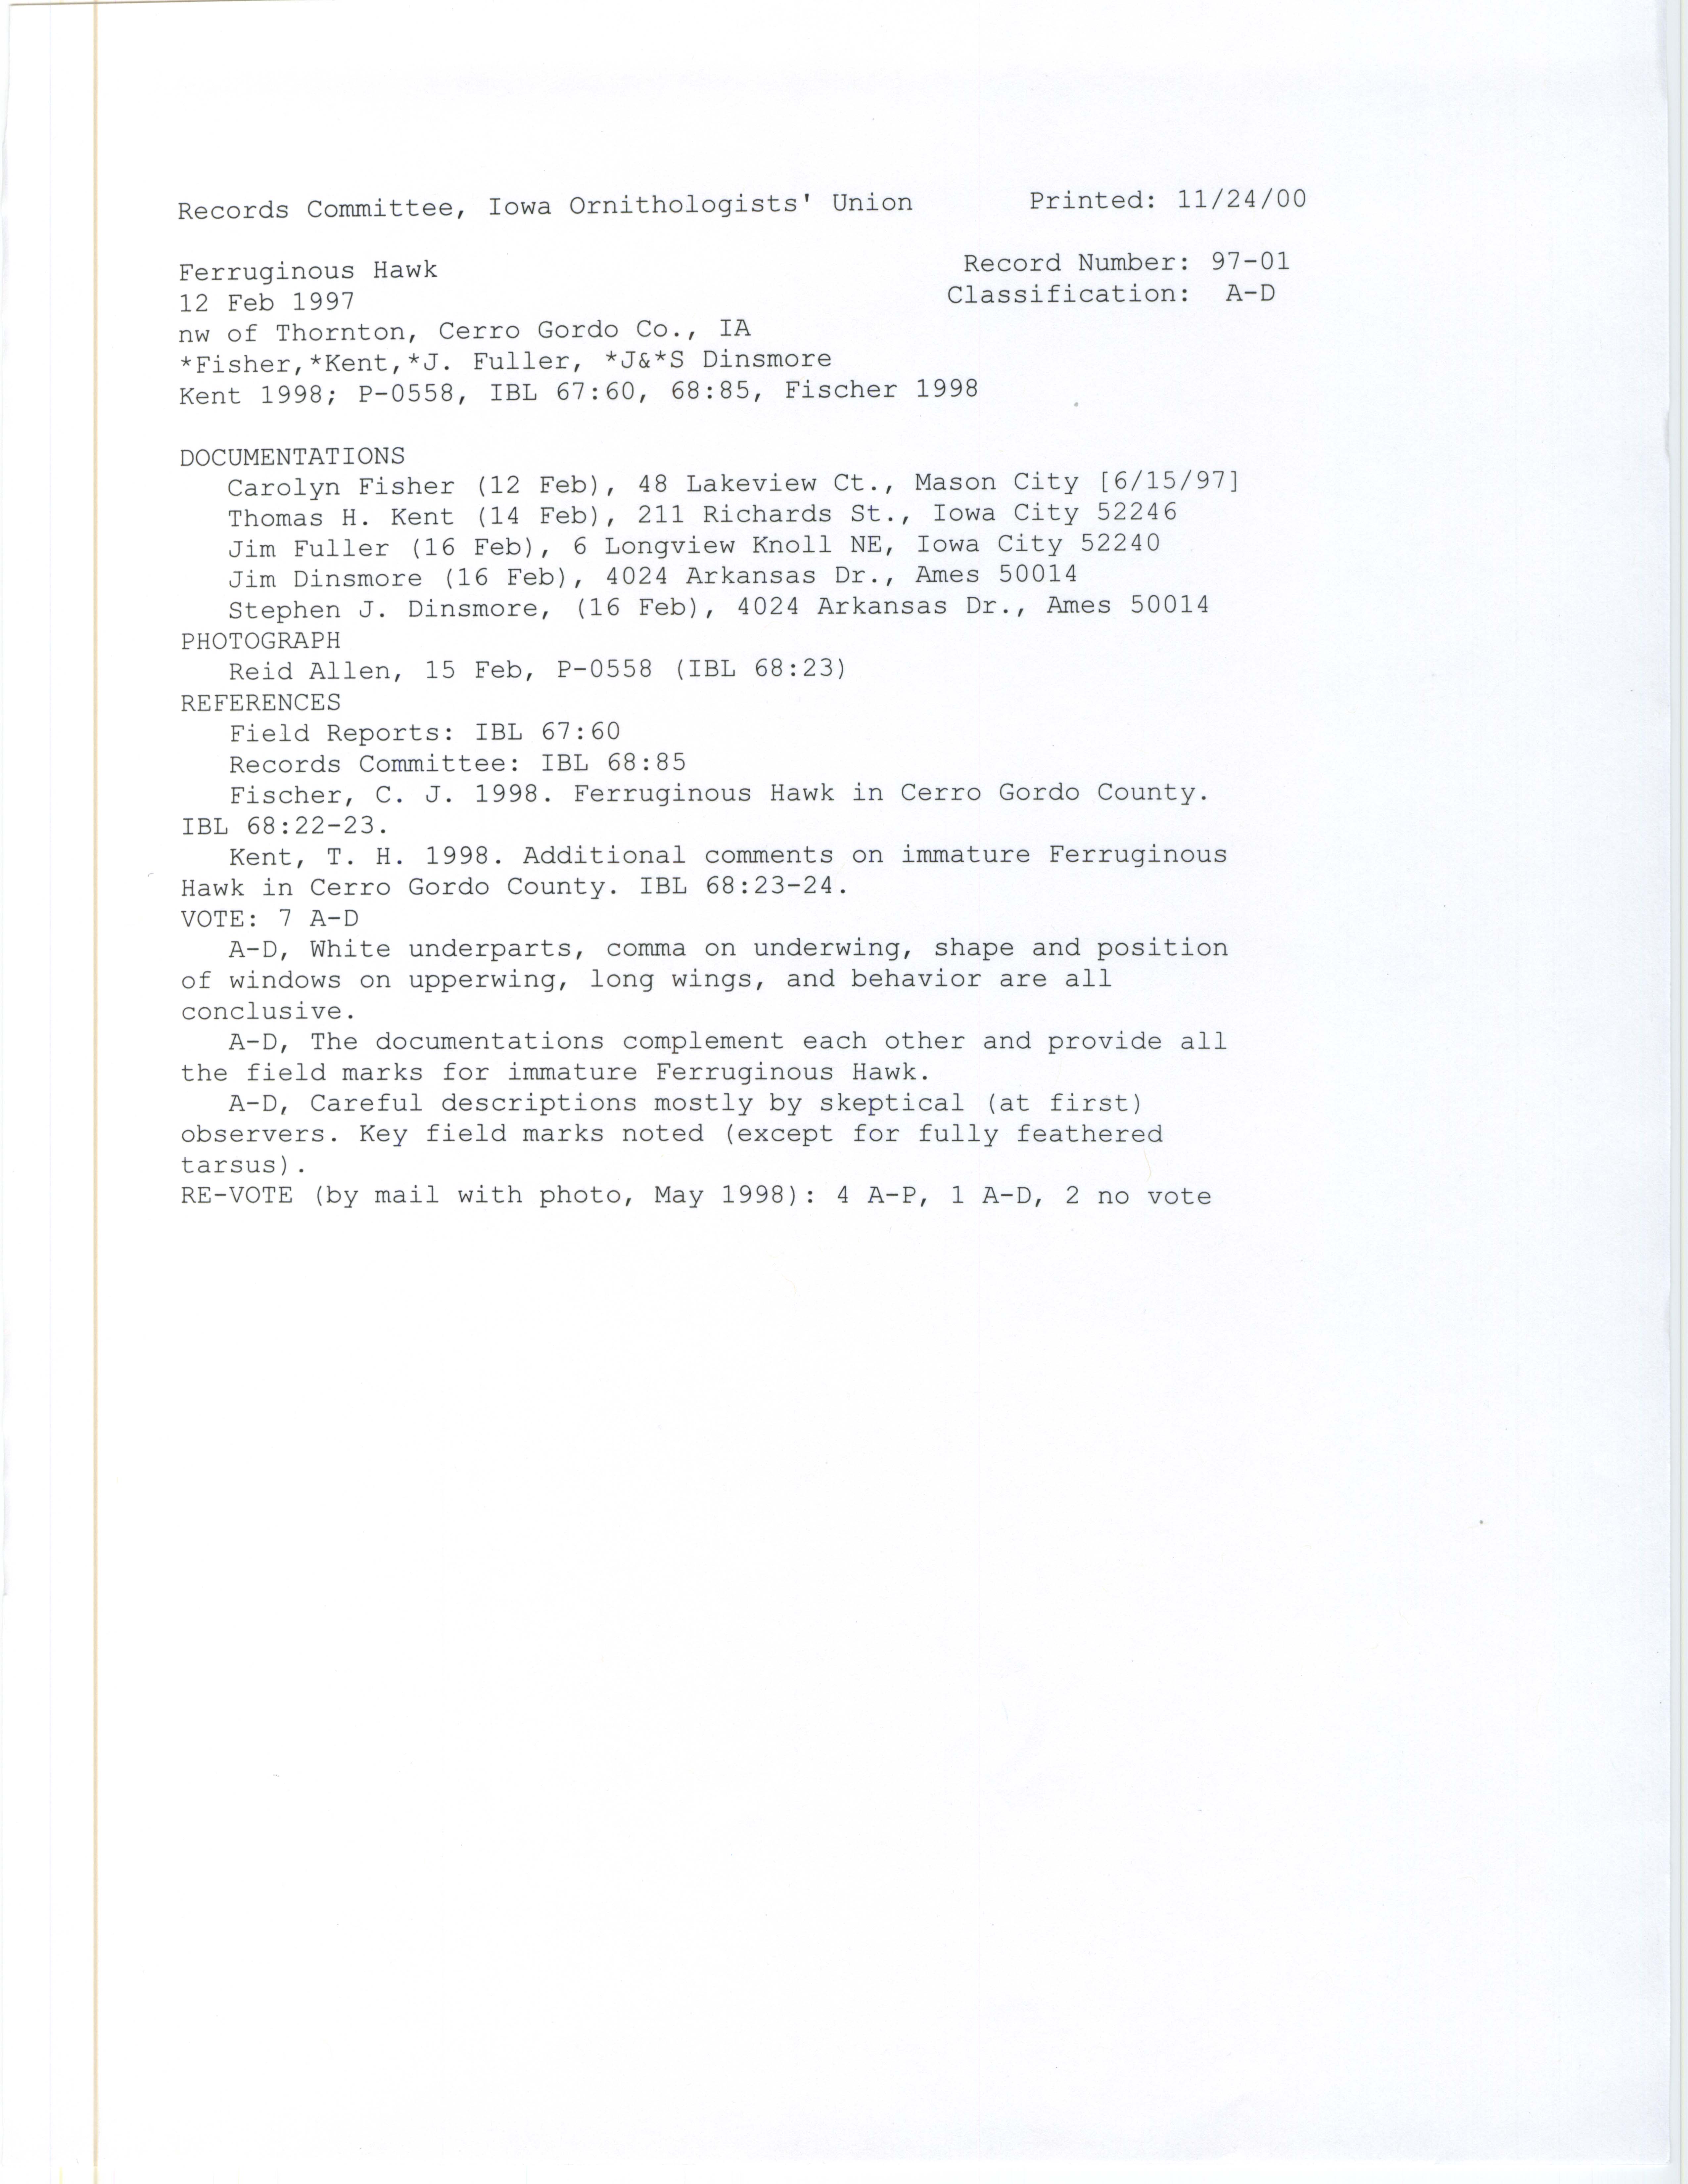 Records Committee review for rare bird sighting of Ferruginous Hawk at Thornton, 1997